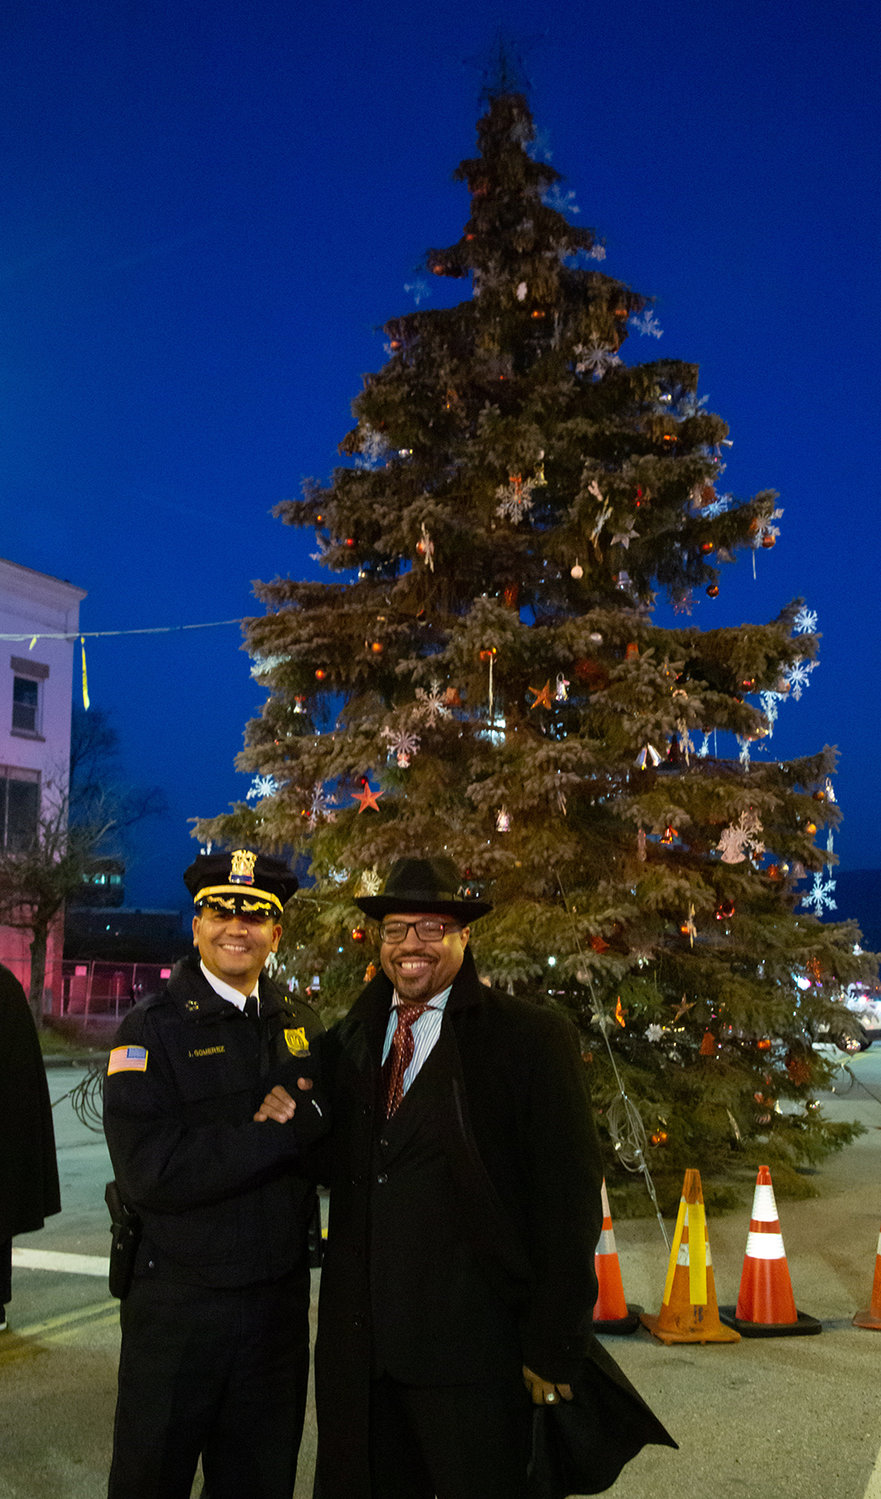 Police Commissioner Jose A. Gomerez and Mayor Torrance Harvey spread good cheer.